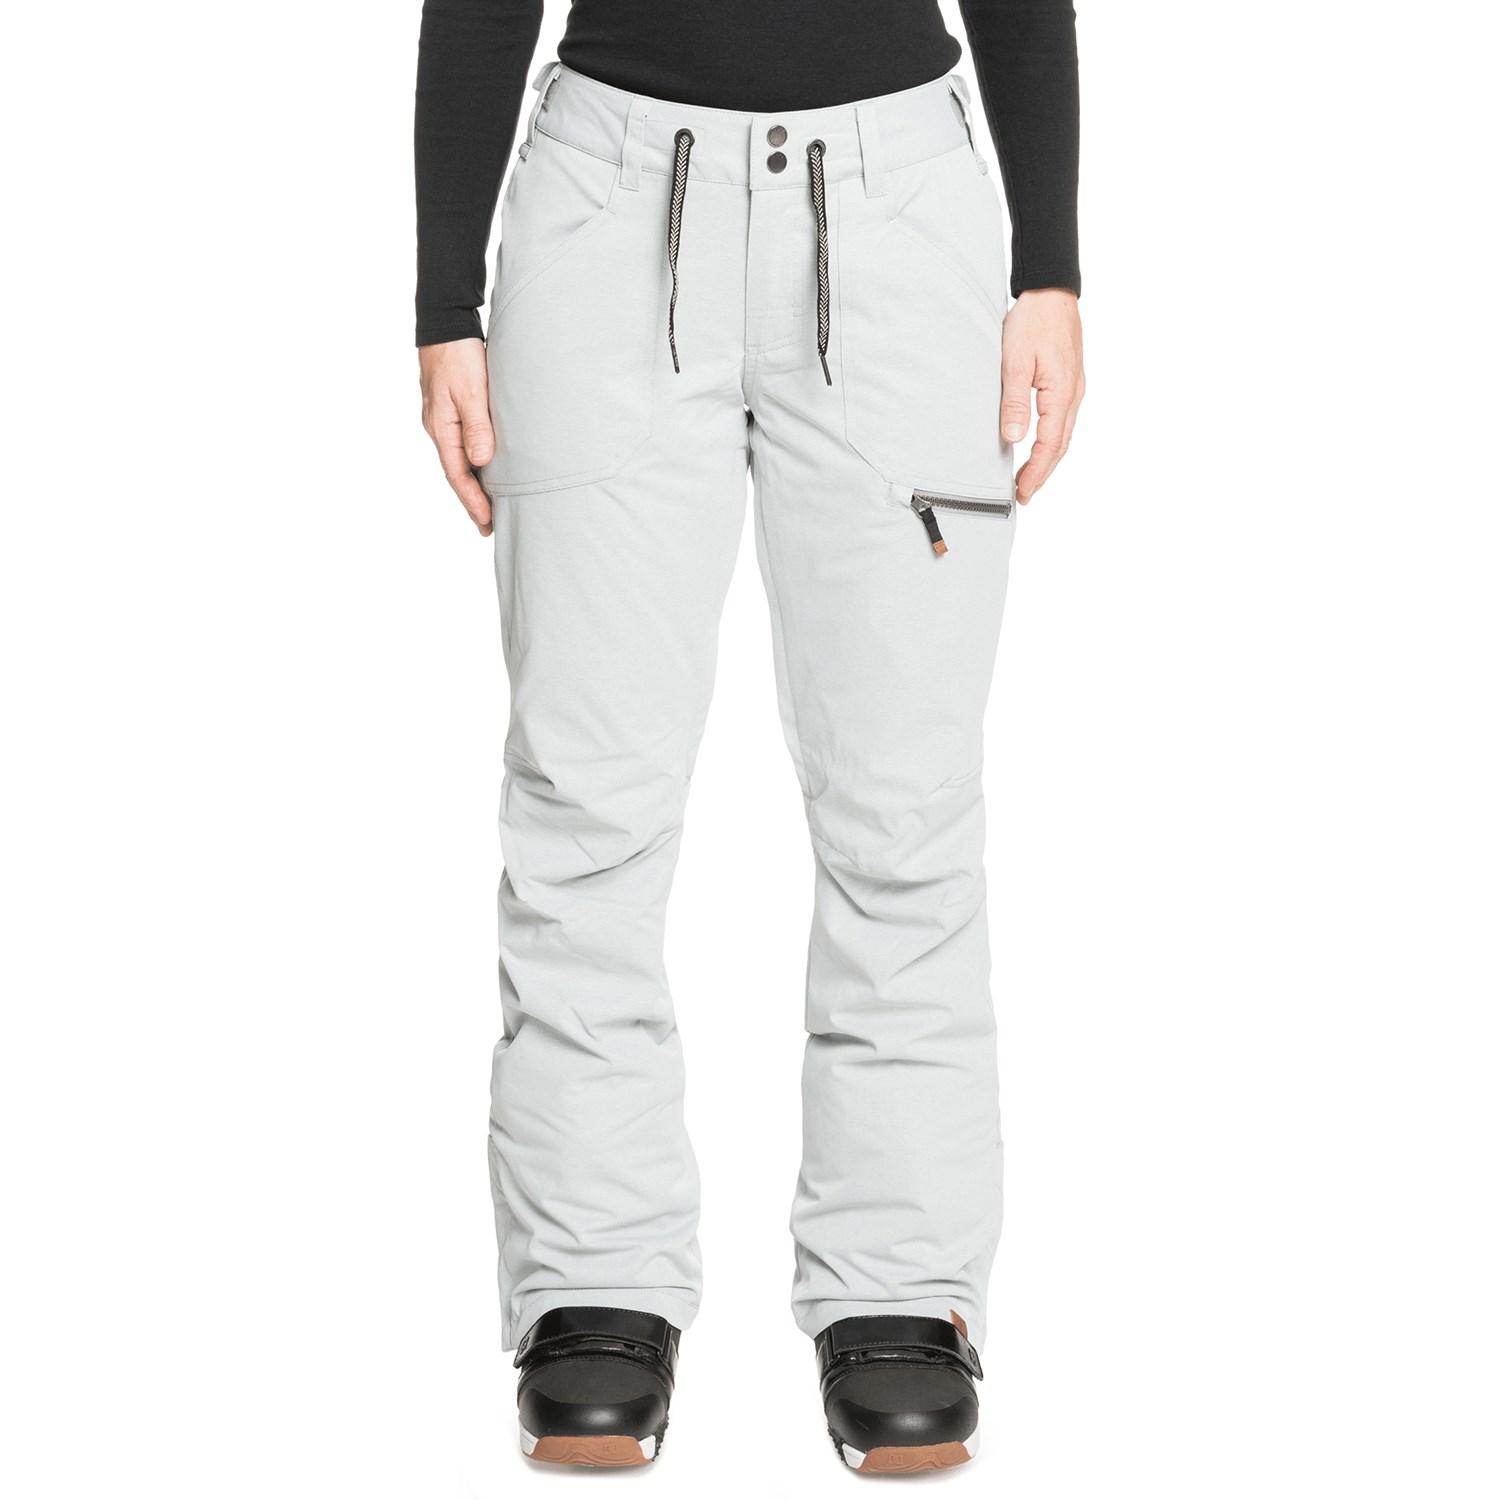 Roxy Women's Nadia Insulated Snow Pant - High Mountain Sports